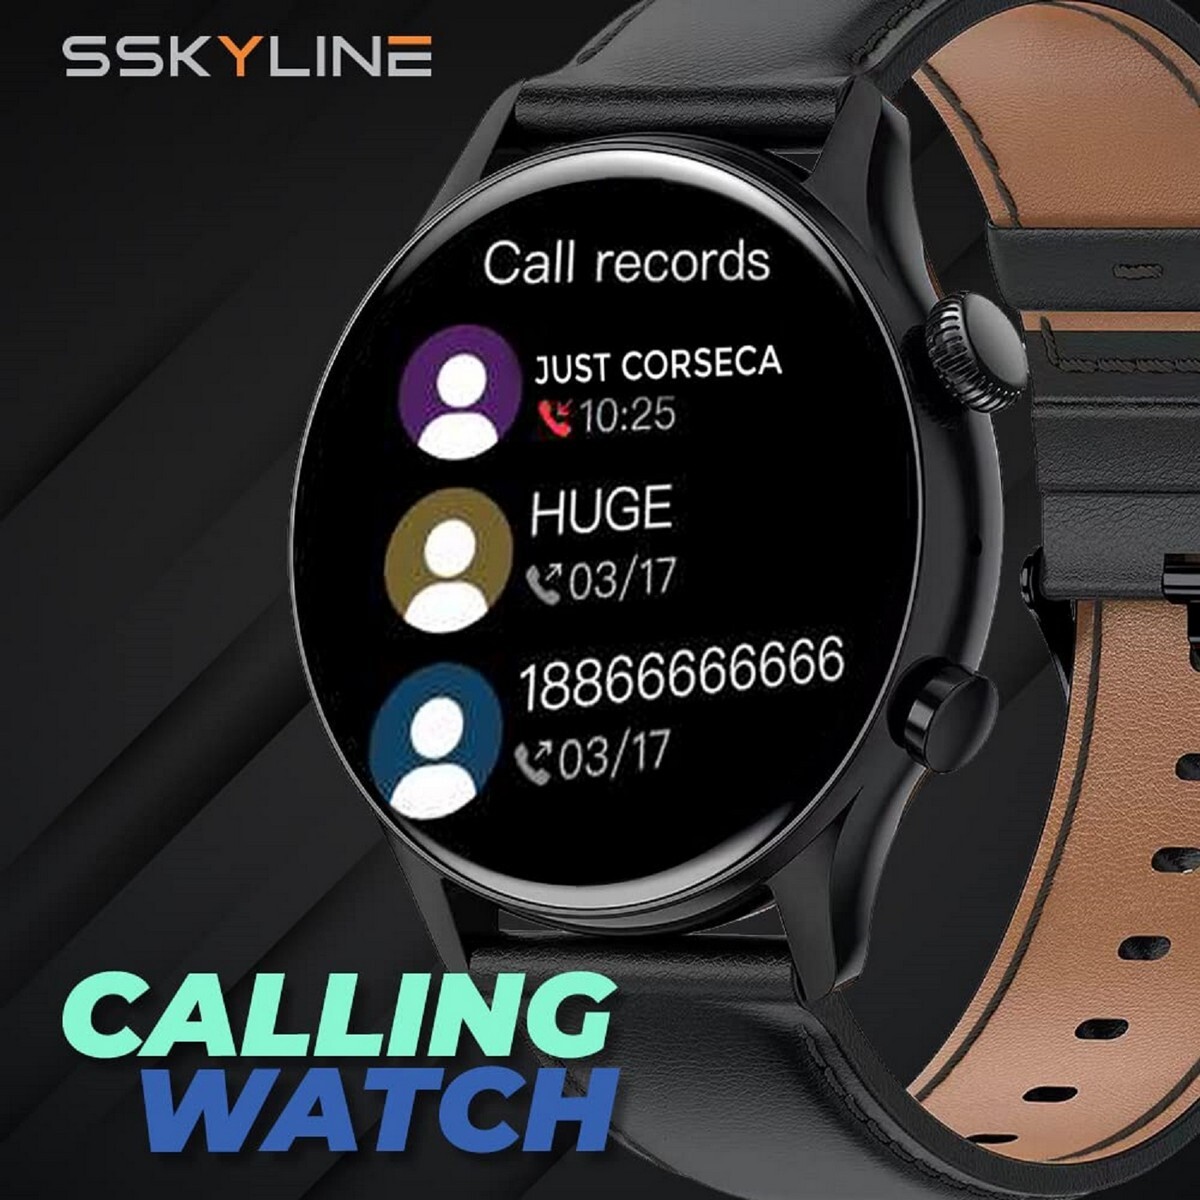 Corseca Just Sskyline 1.3-inch AMOLED Display with 360x360 Resolution and a 300mAh Battery Capacity Smart Watch